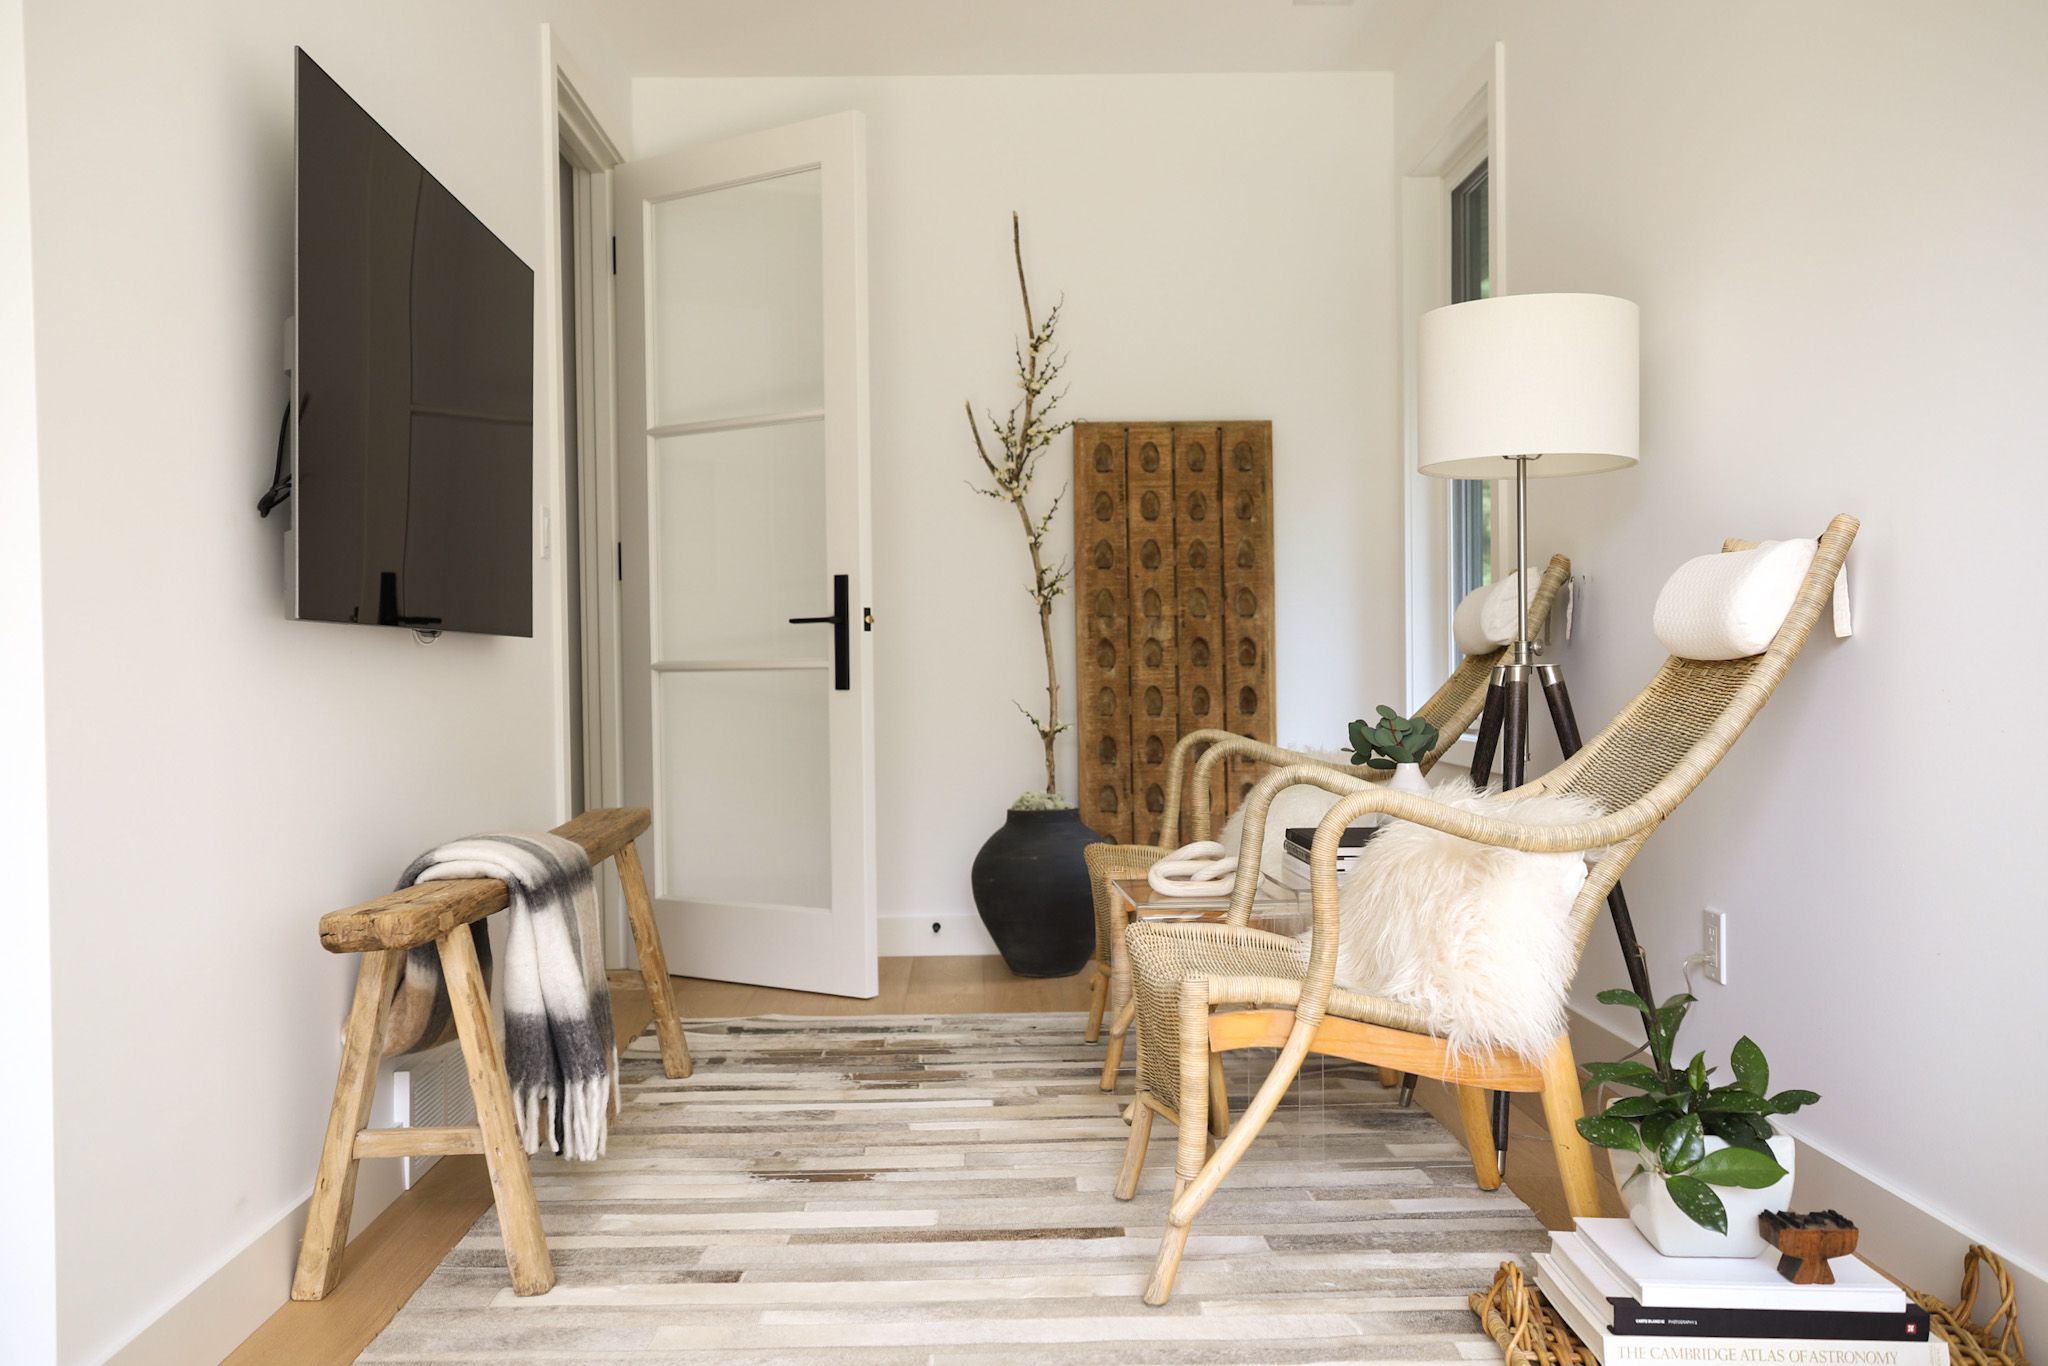 Easy Tricks to Make a Small Room Look Bigger